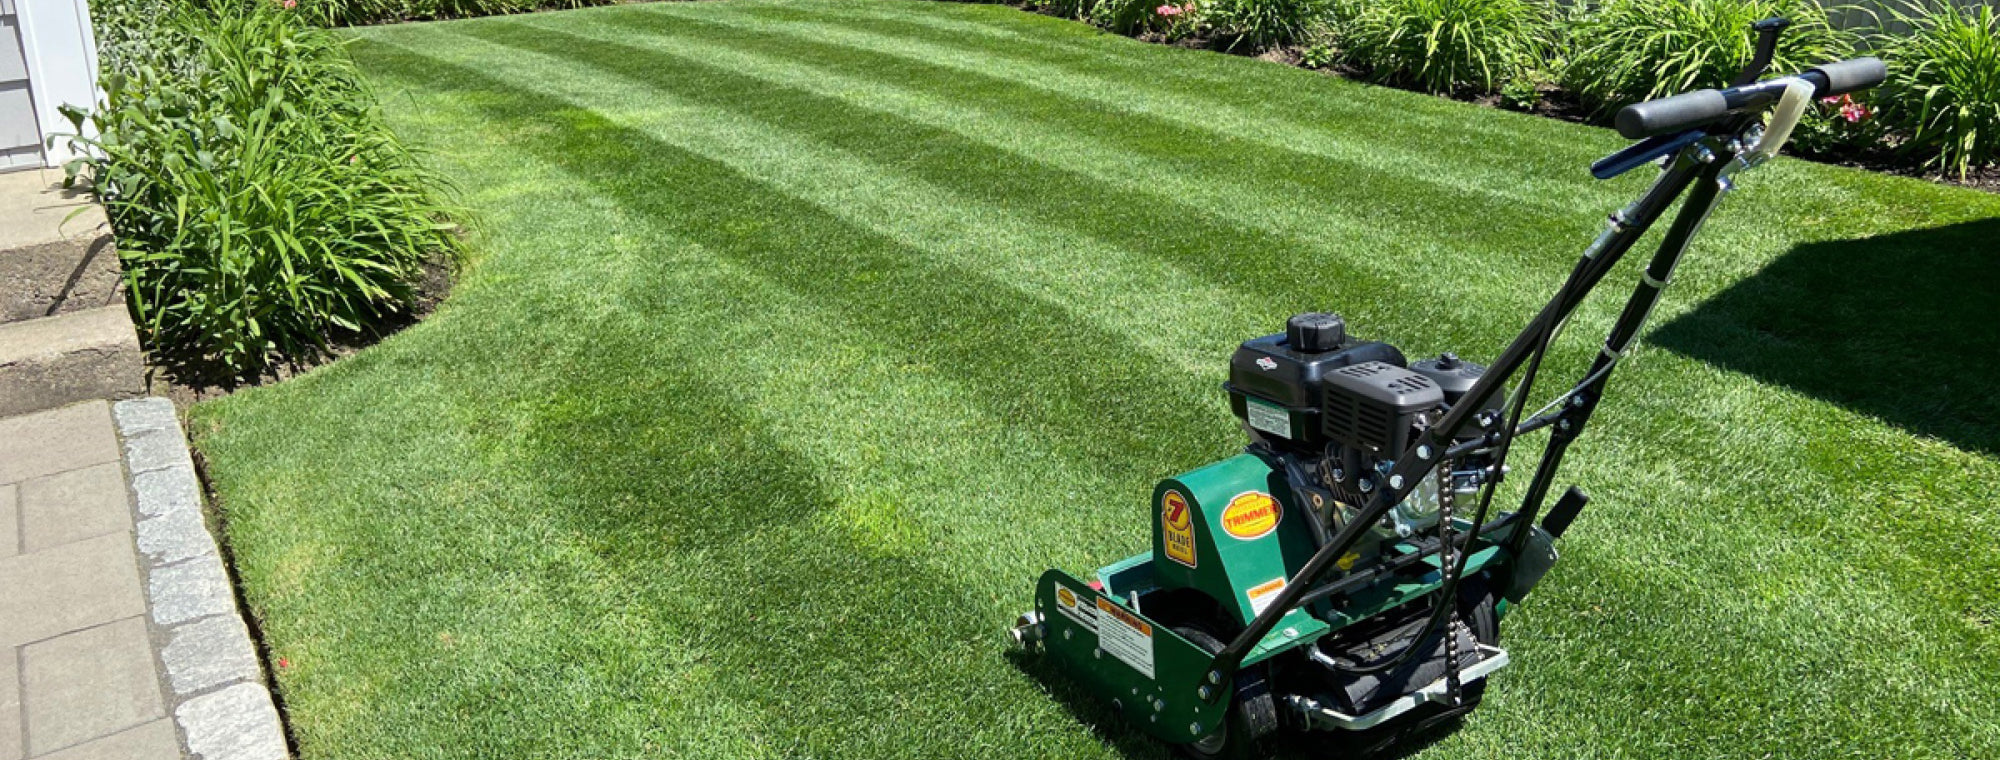 beautiful mowed lines at a residential house